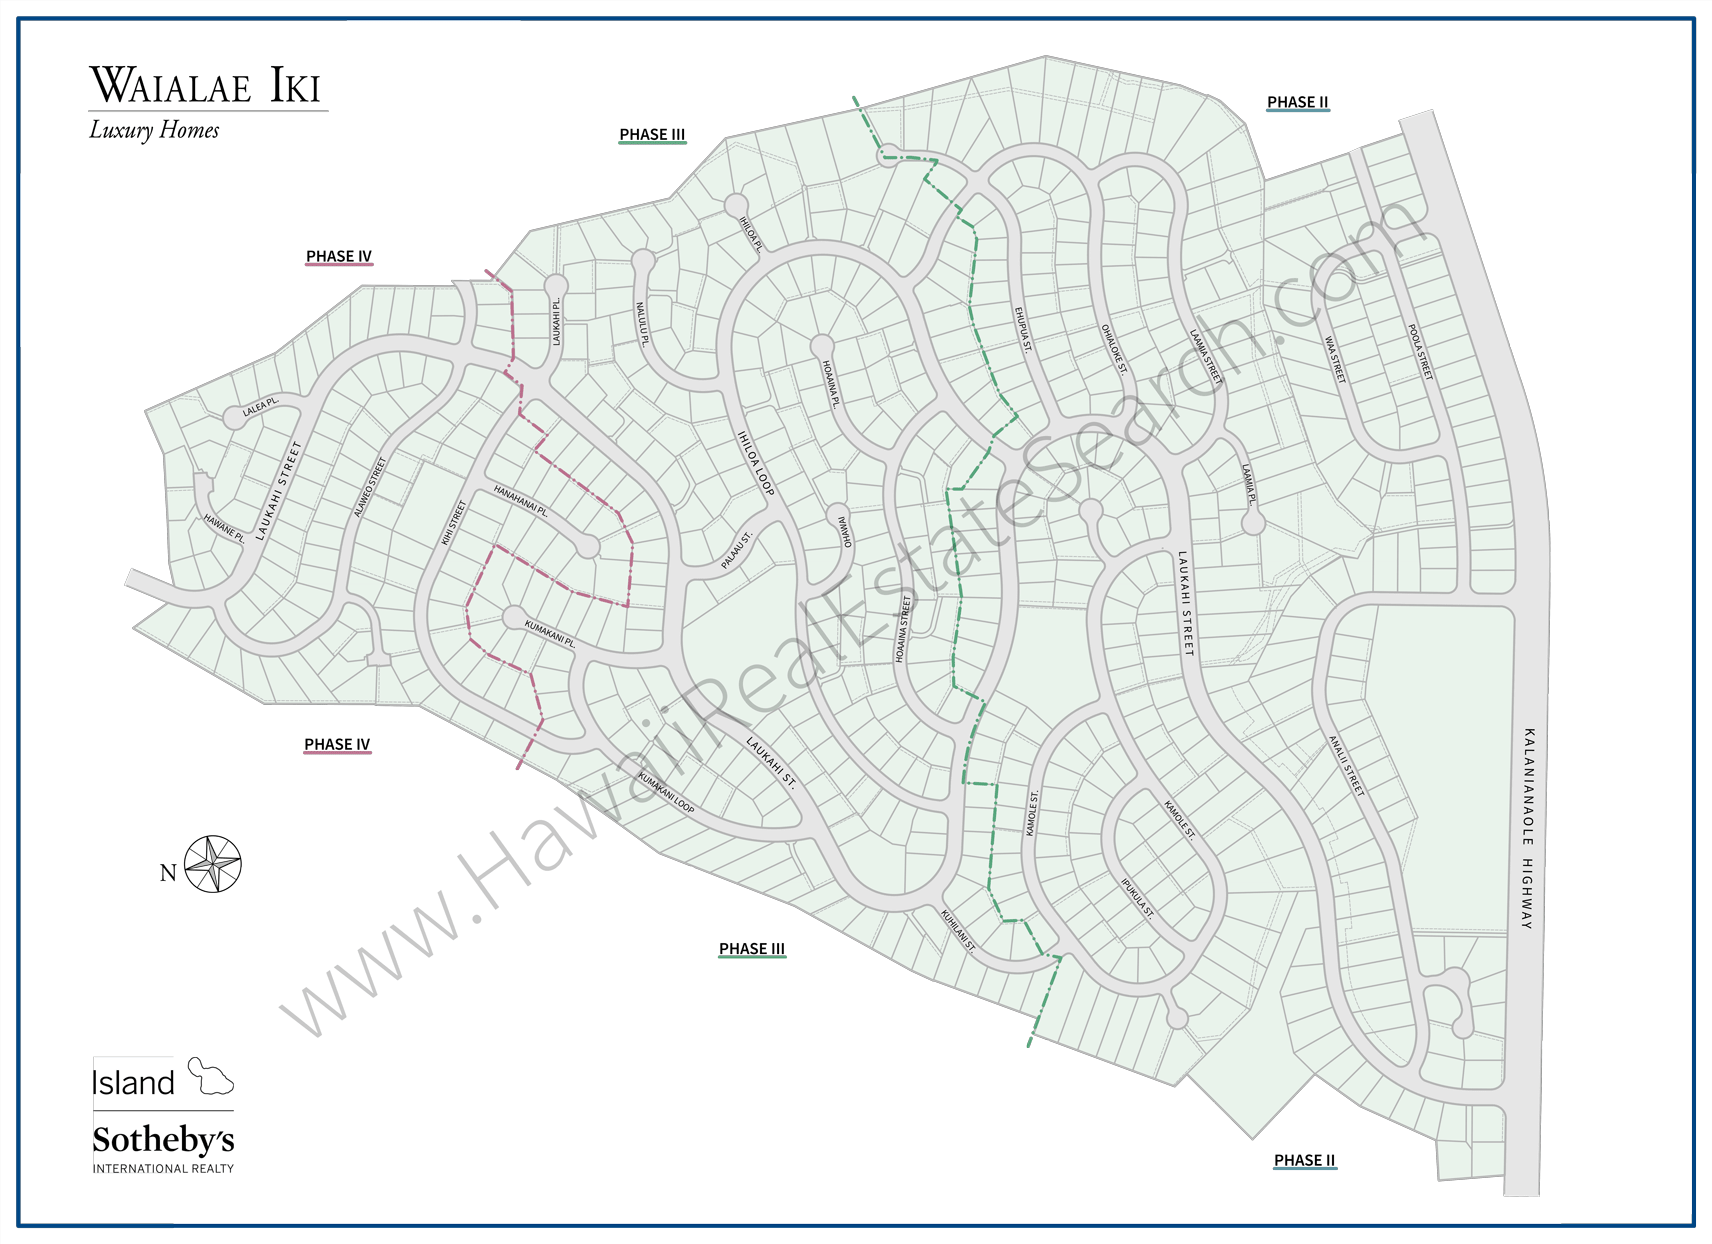 Waialae Iki Map - All Phases